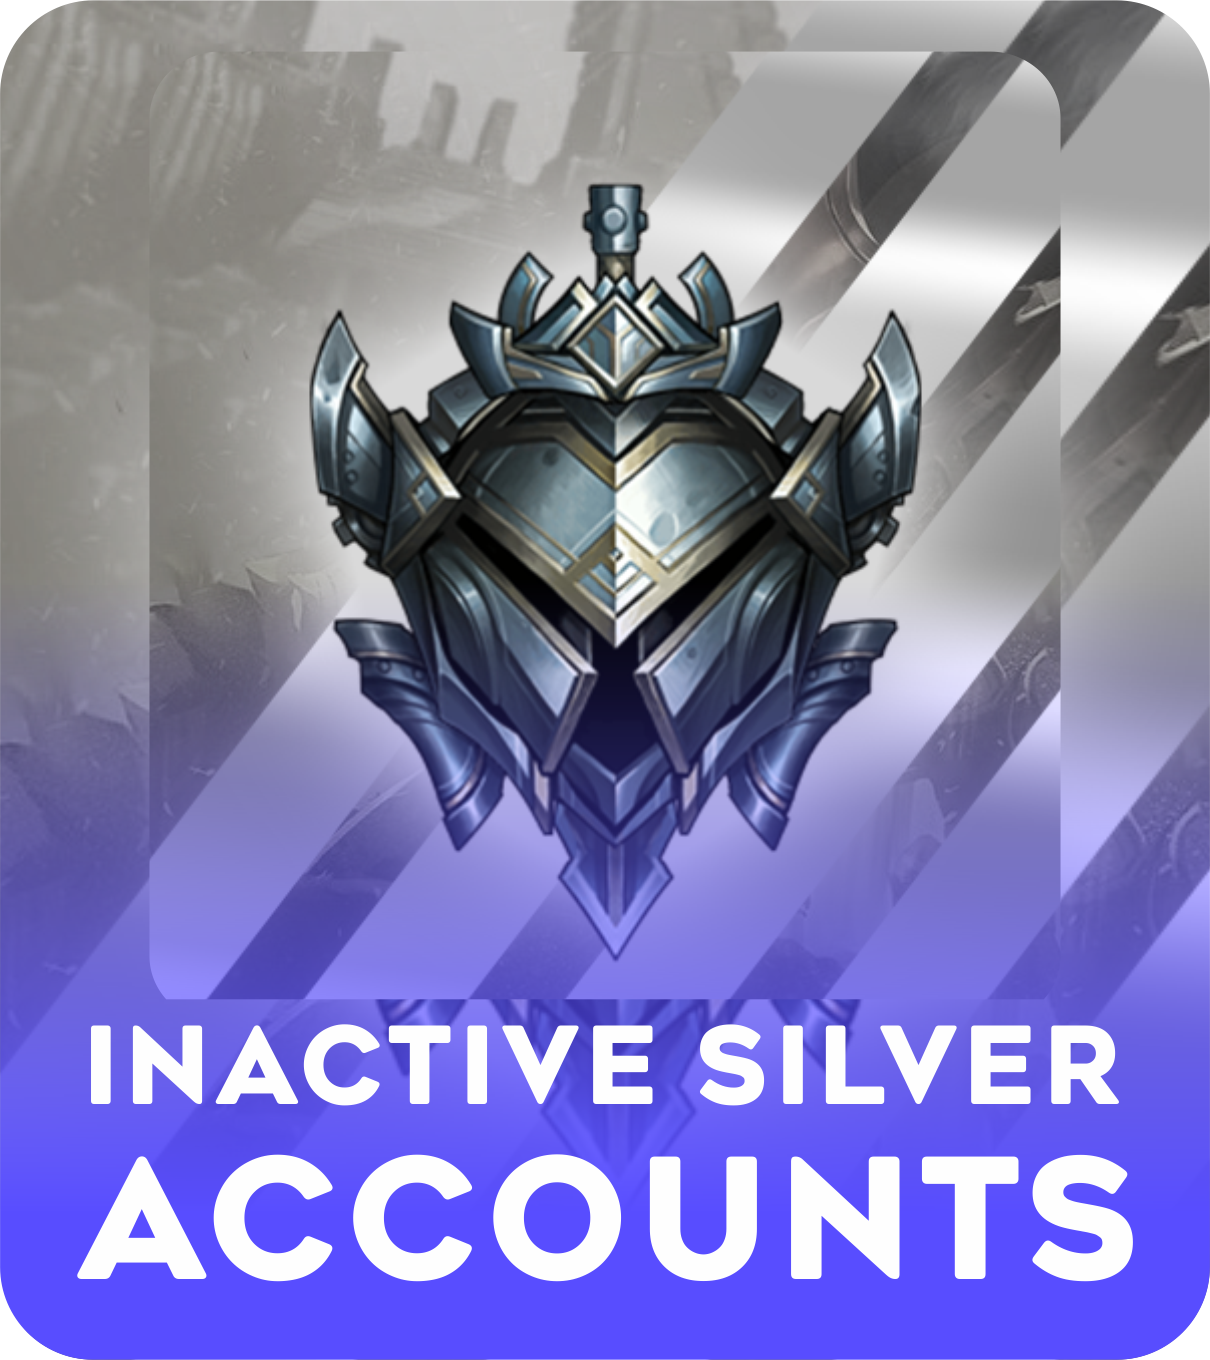 Inactive silver account